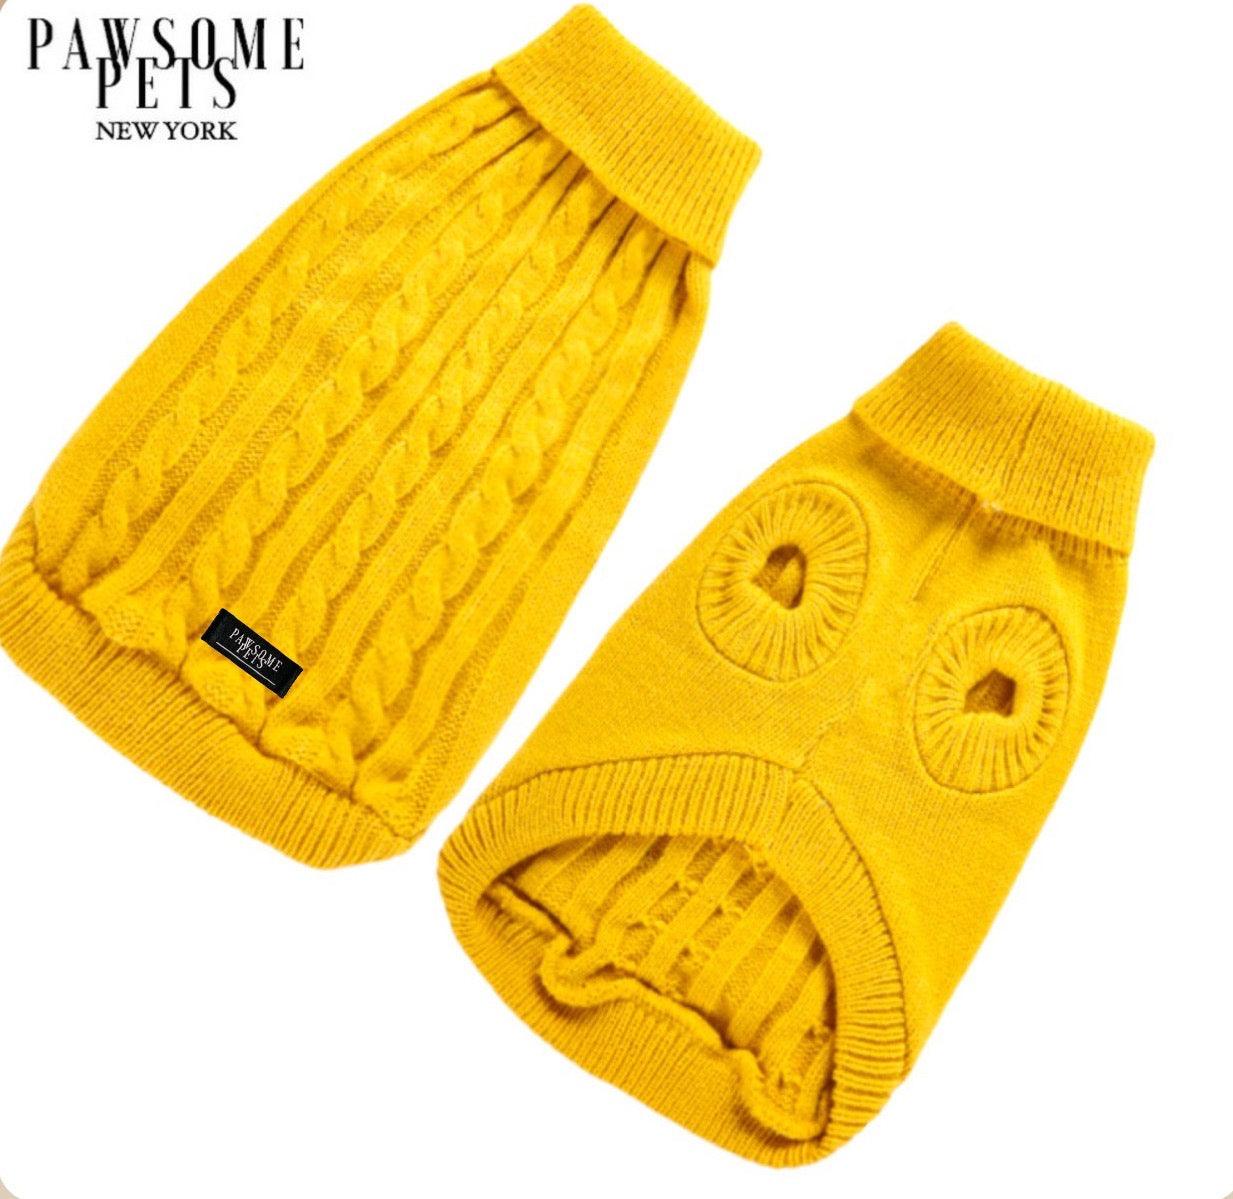 DOG AND CAT CABLE KNIT SWEATER - YELLOW